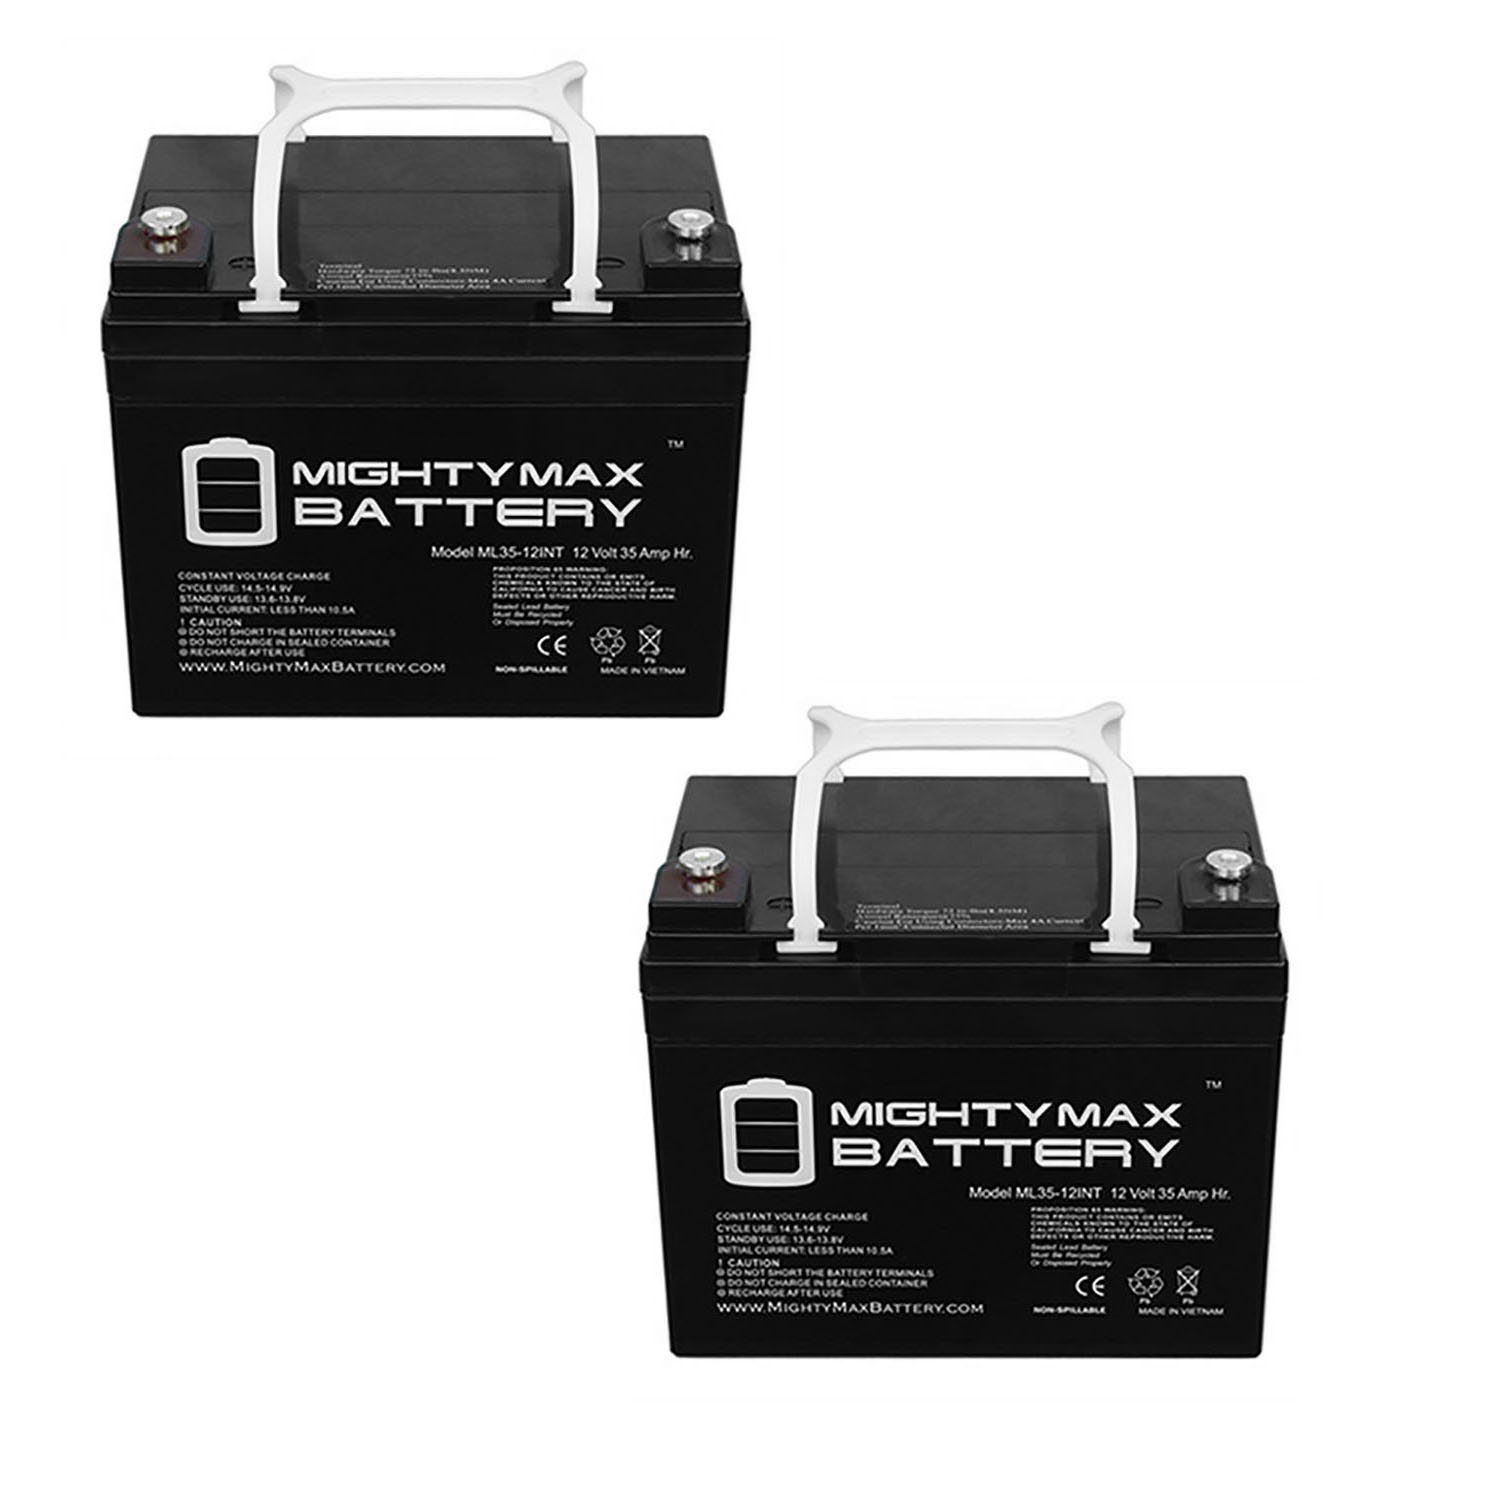 12V 35AH INT Replacement Battery for Apex D5722 - 2 Pack